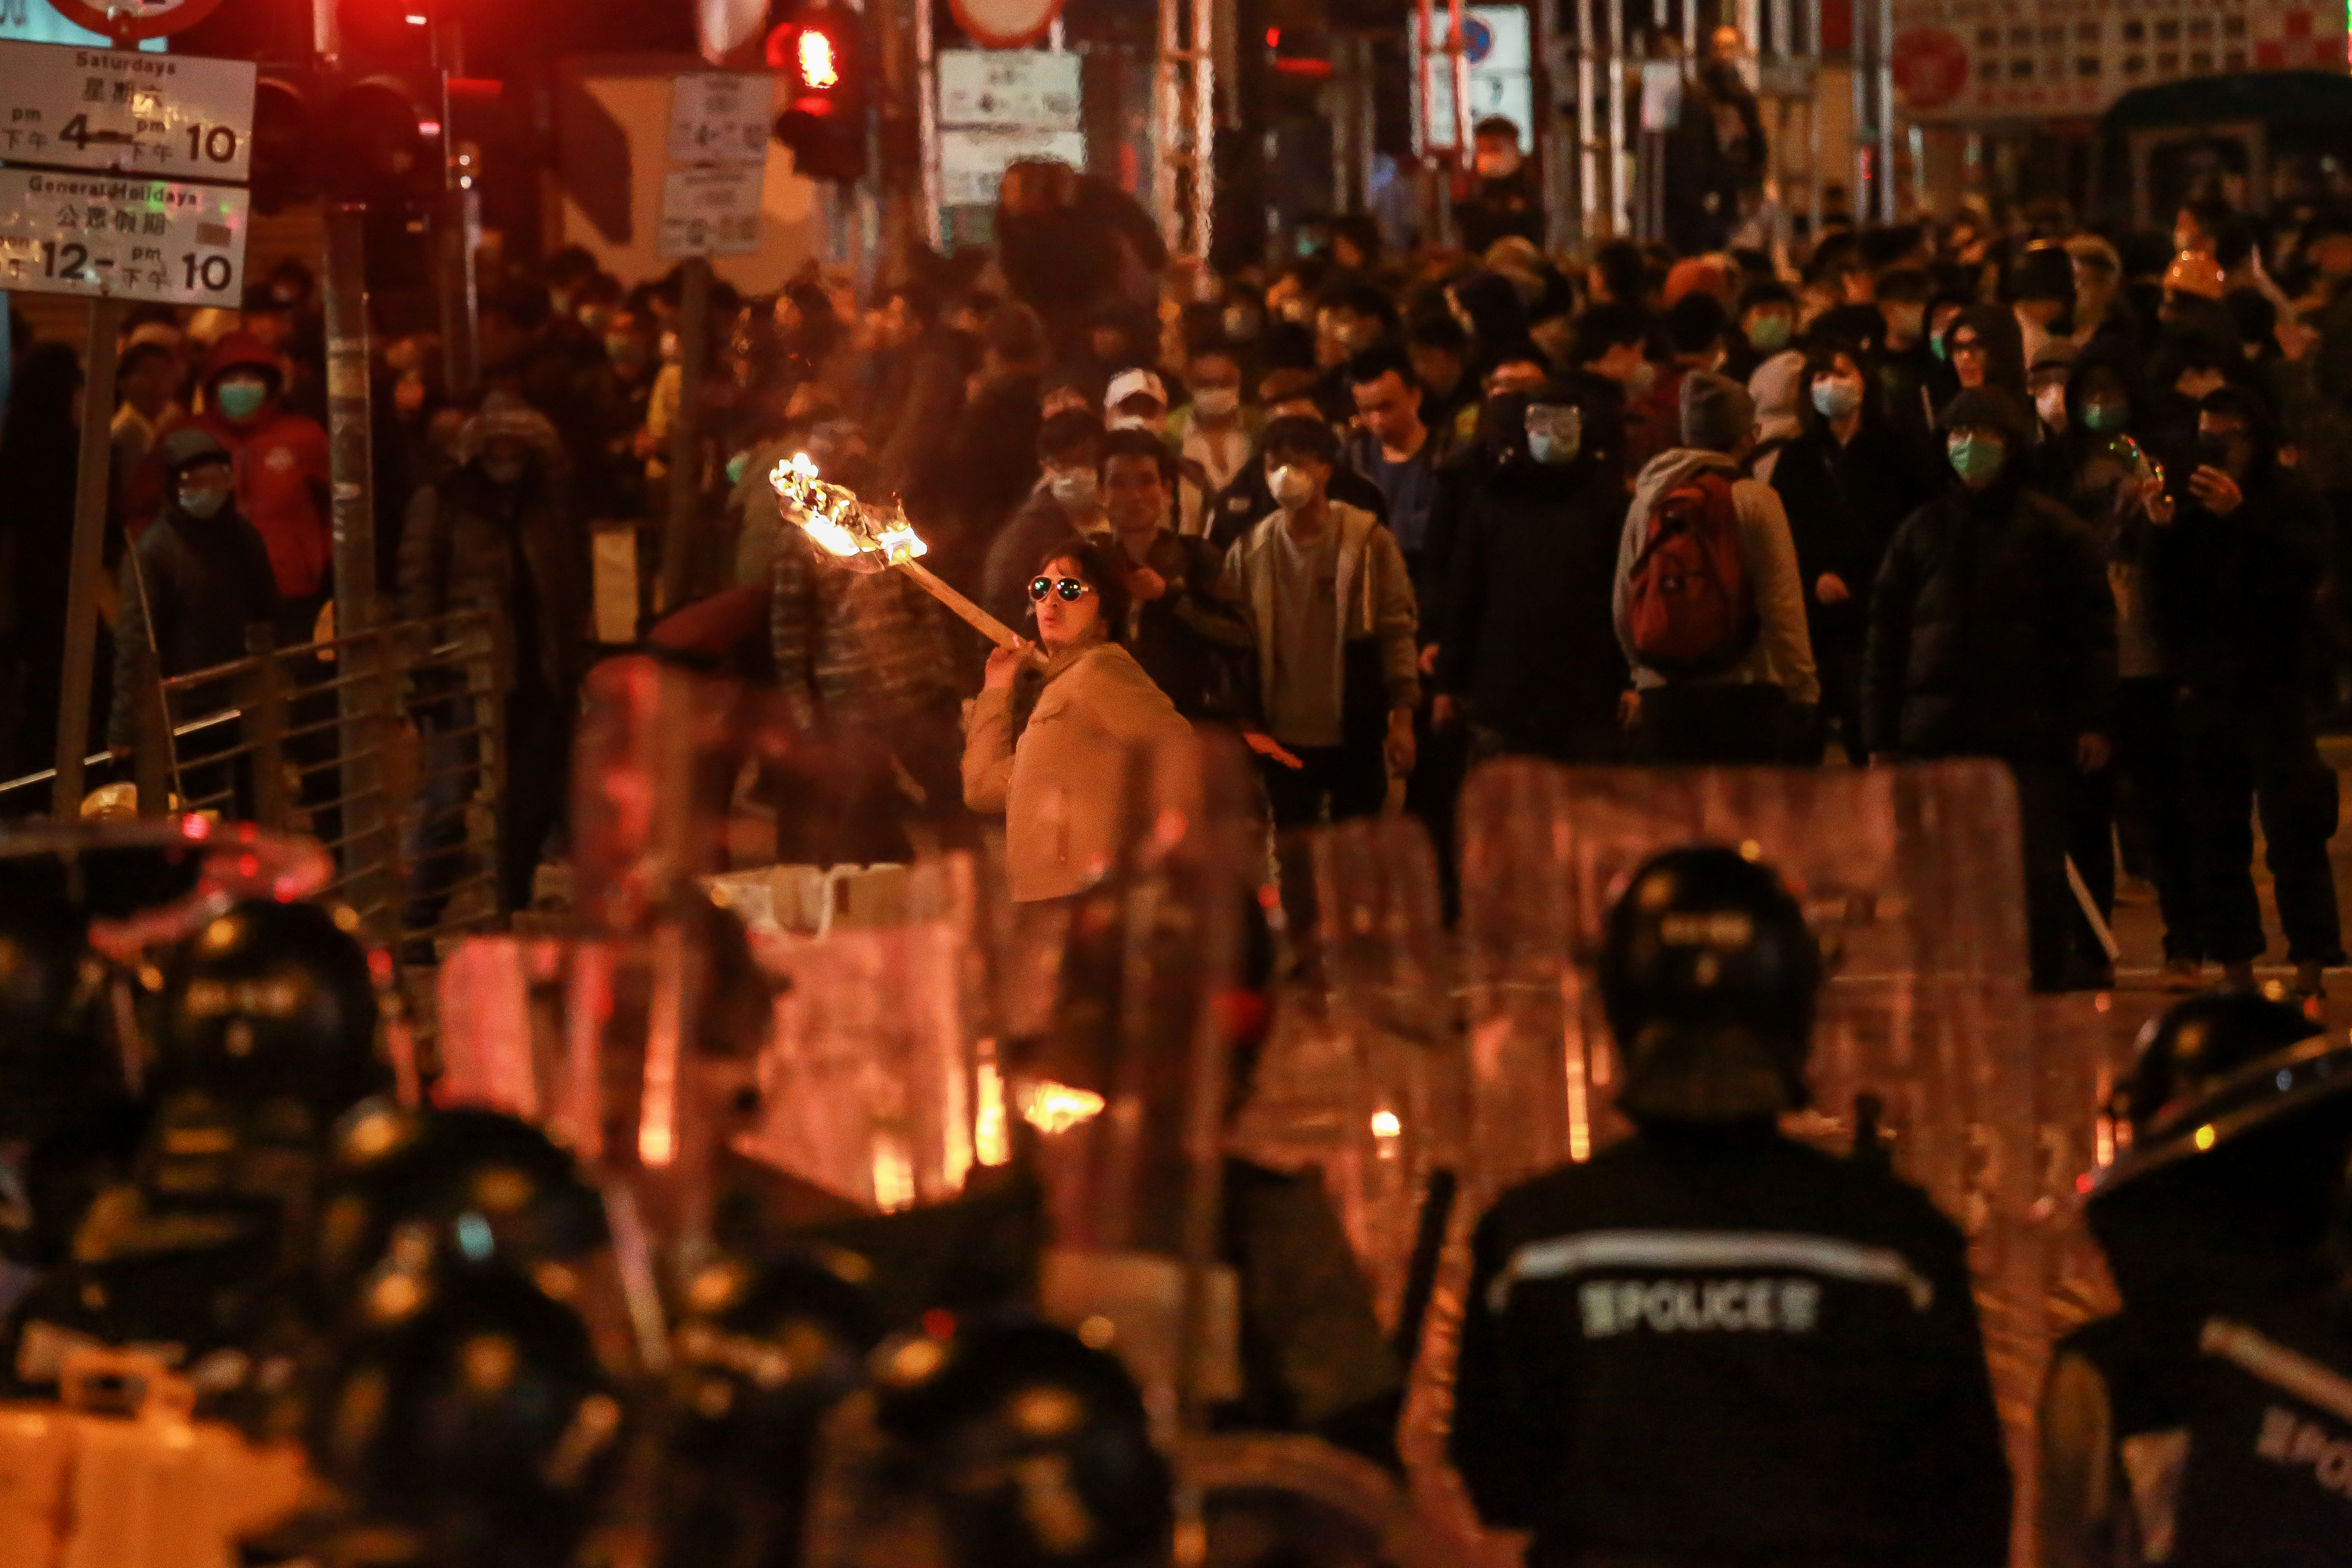 A rioter confronts police in the Mong Kok area of Hong Kong on Feb. 9, 2016 (Bloomberg/Getty Images)